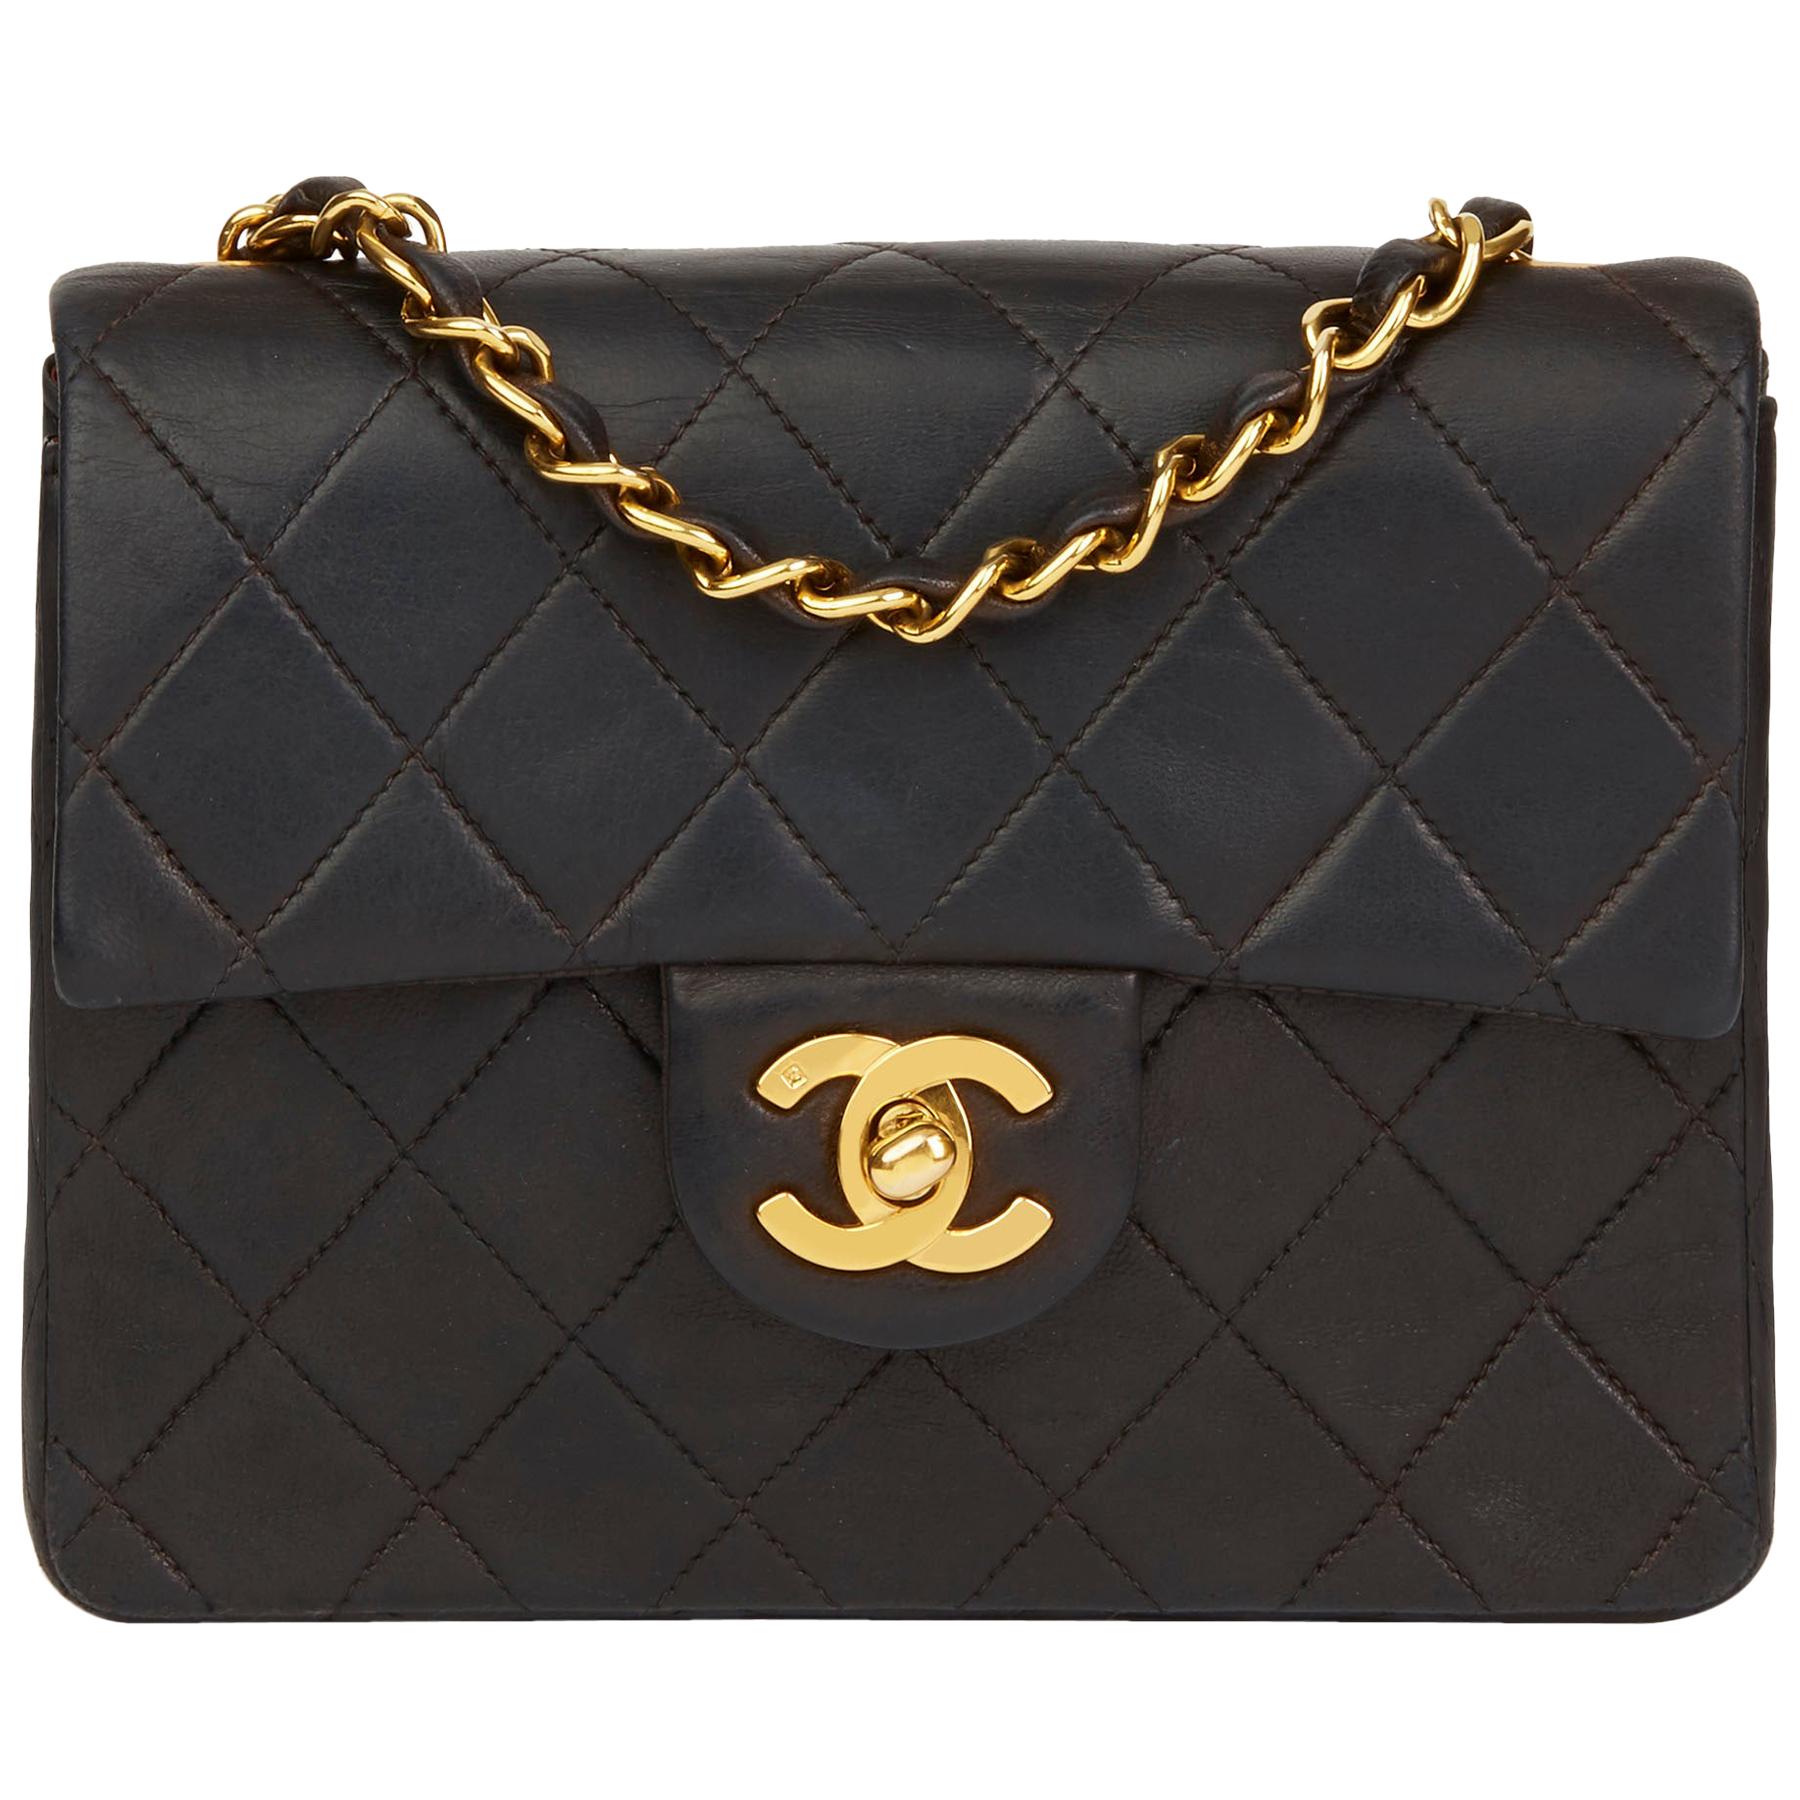 1992 Chanel Black Quilted Lambskin Vintage Mini Flap Bag